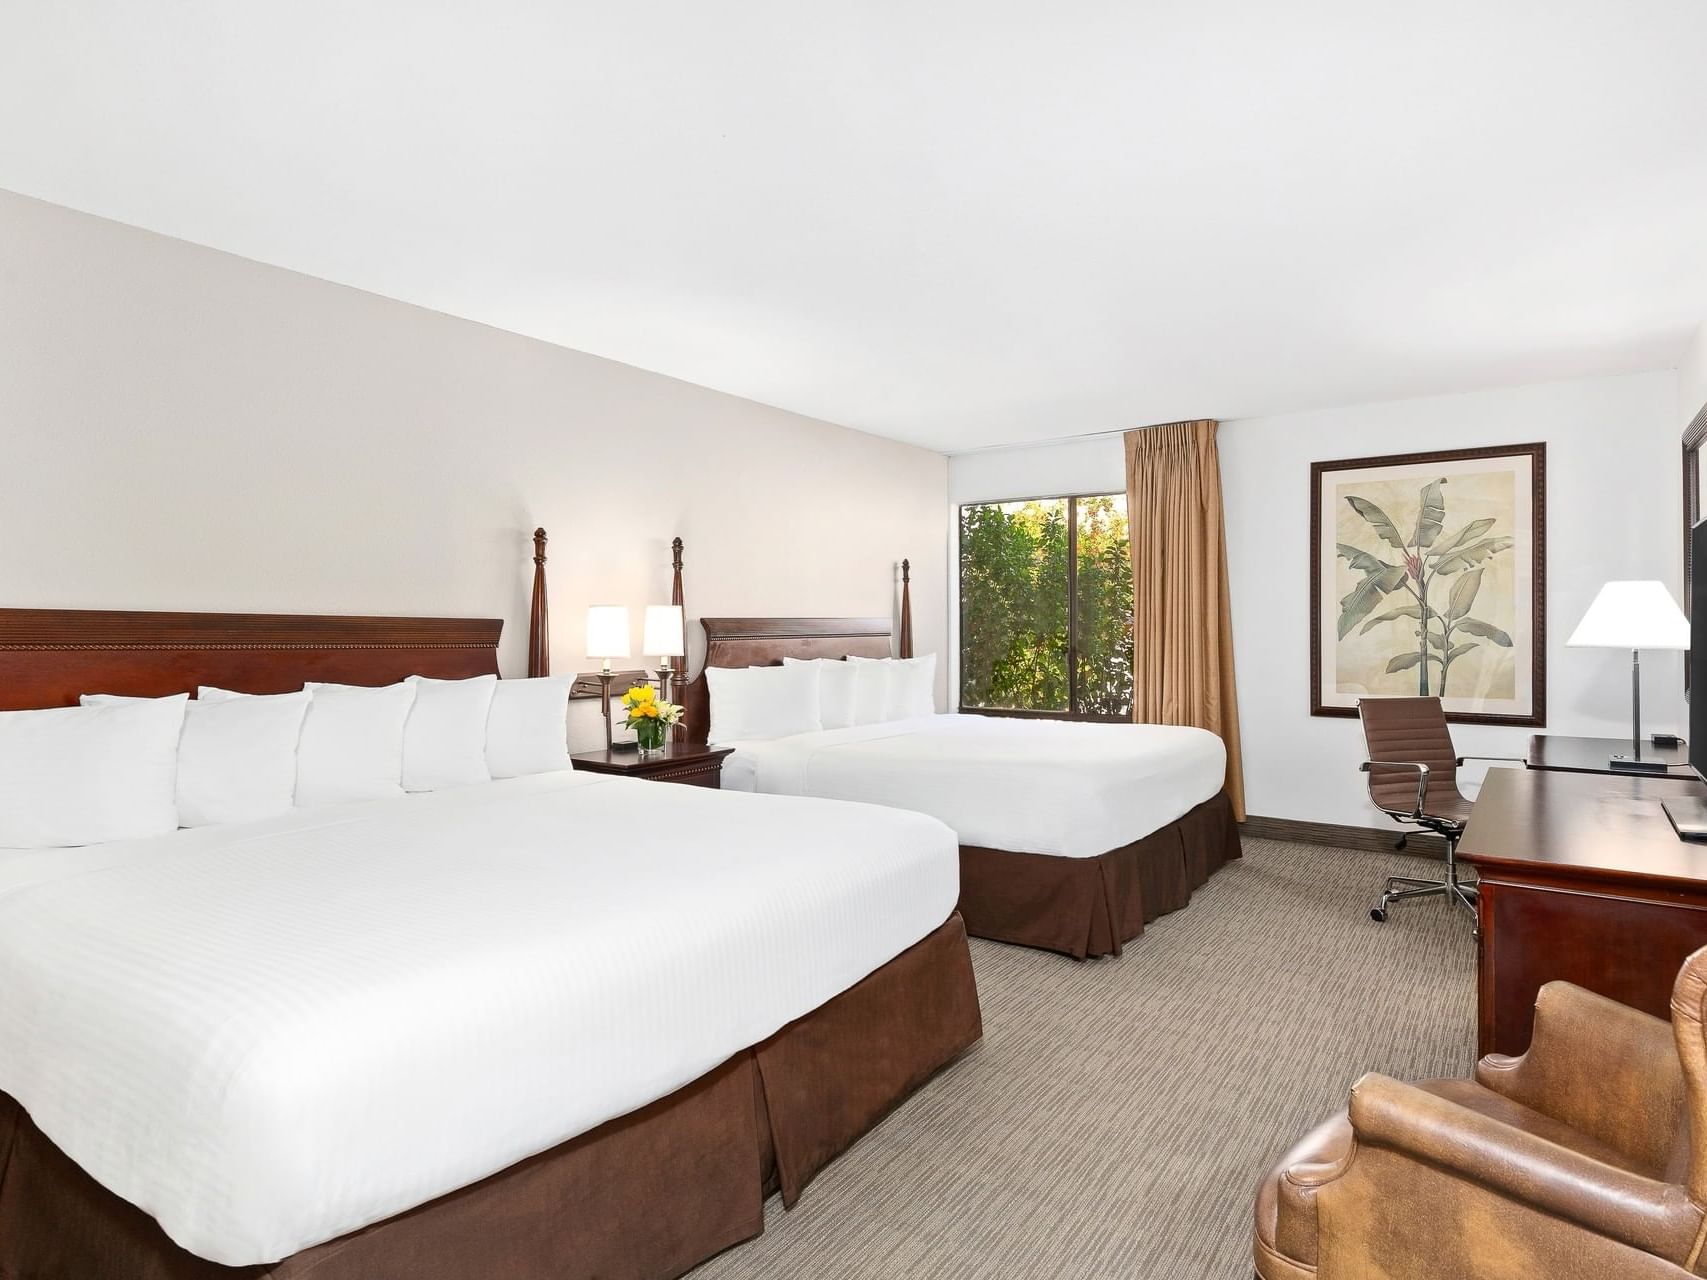 Deluxe 2 King room with twin beds at The Anaheim Hotel